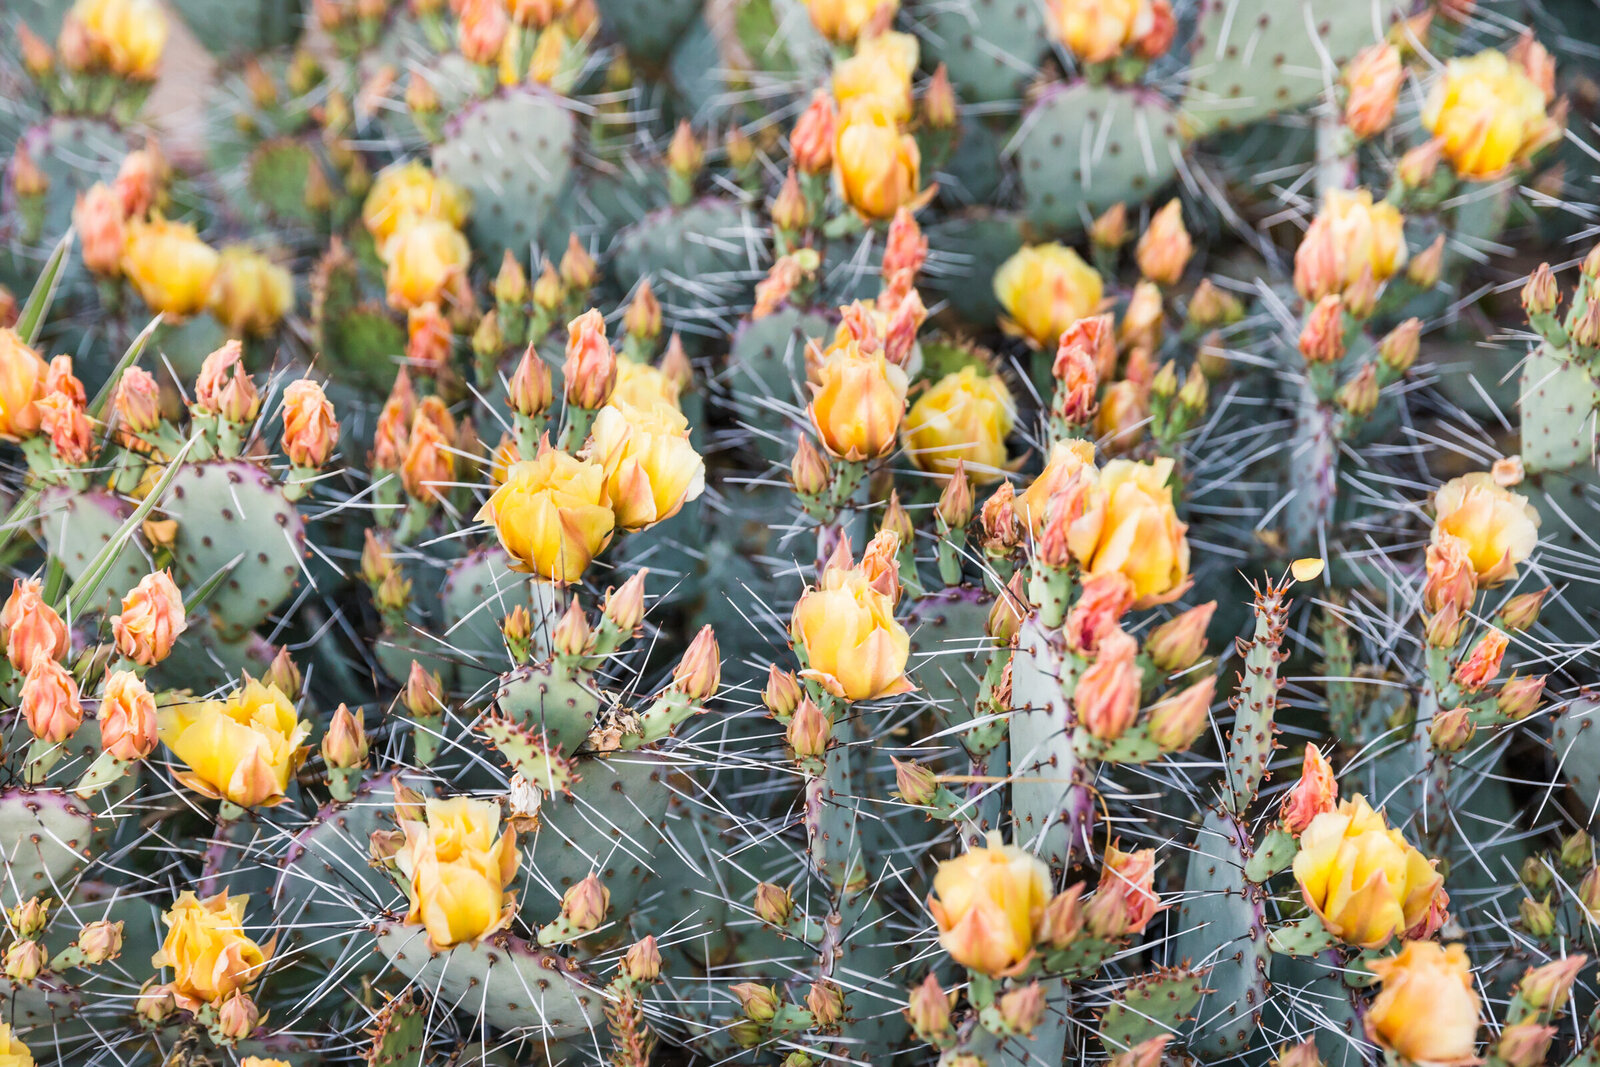 yellow flower buds on cactus in Phoenix